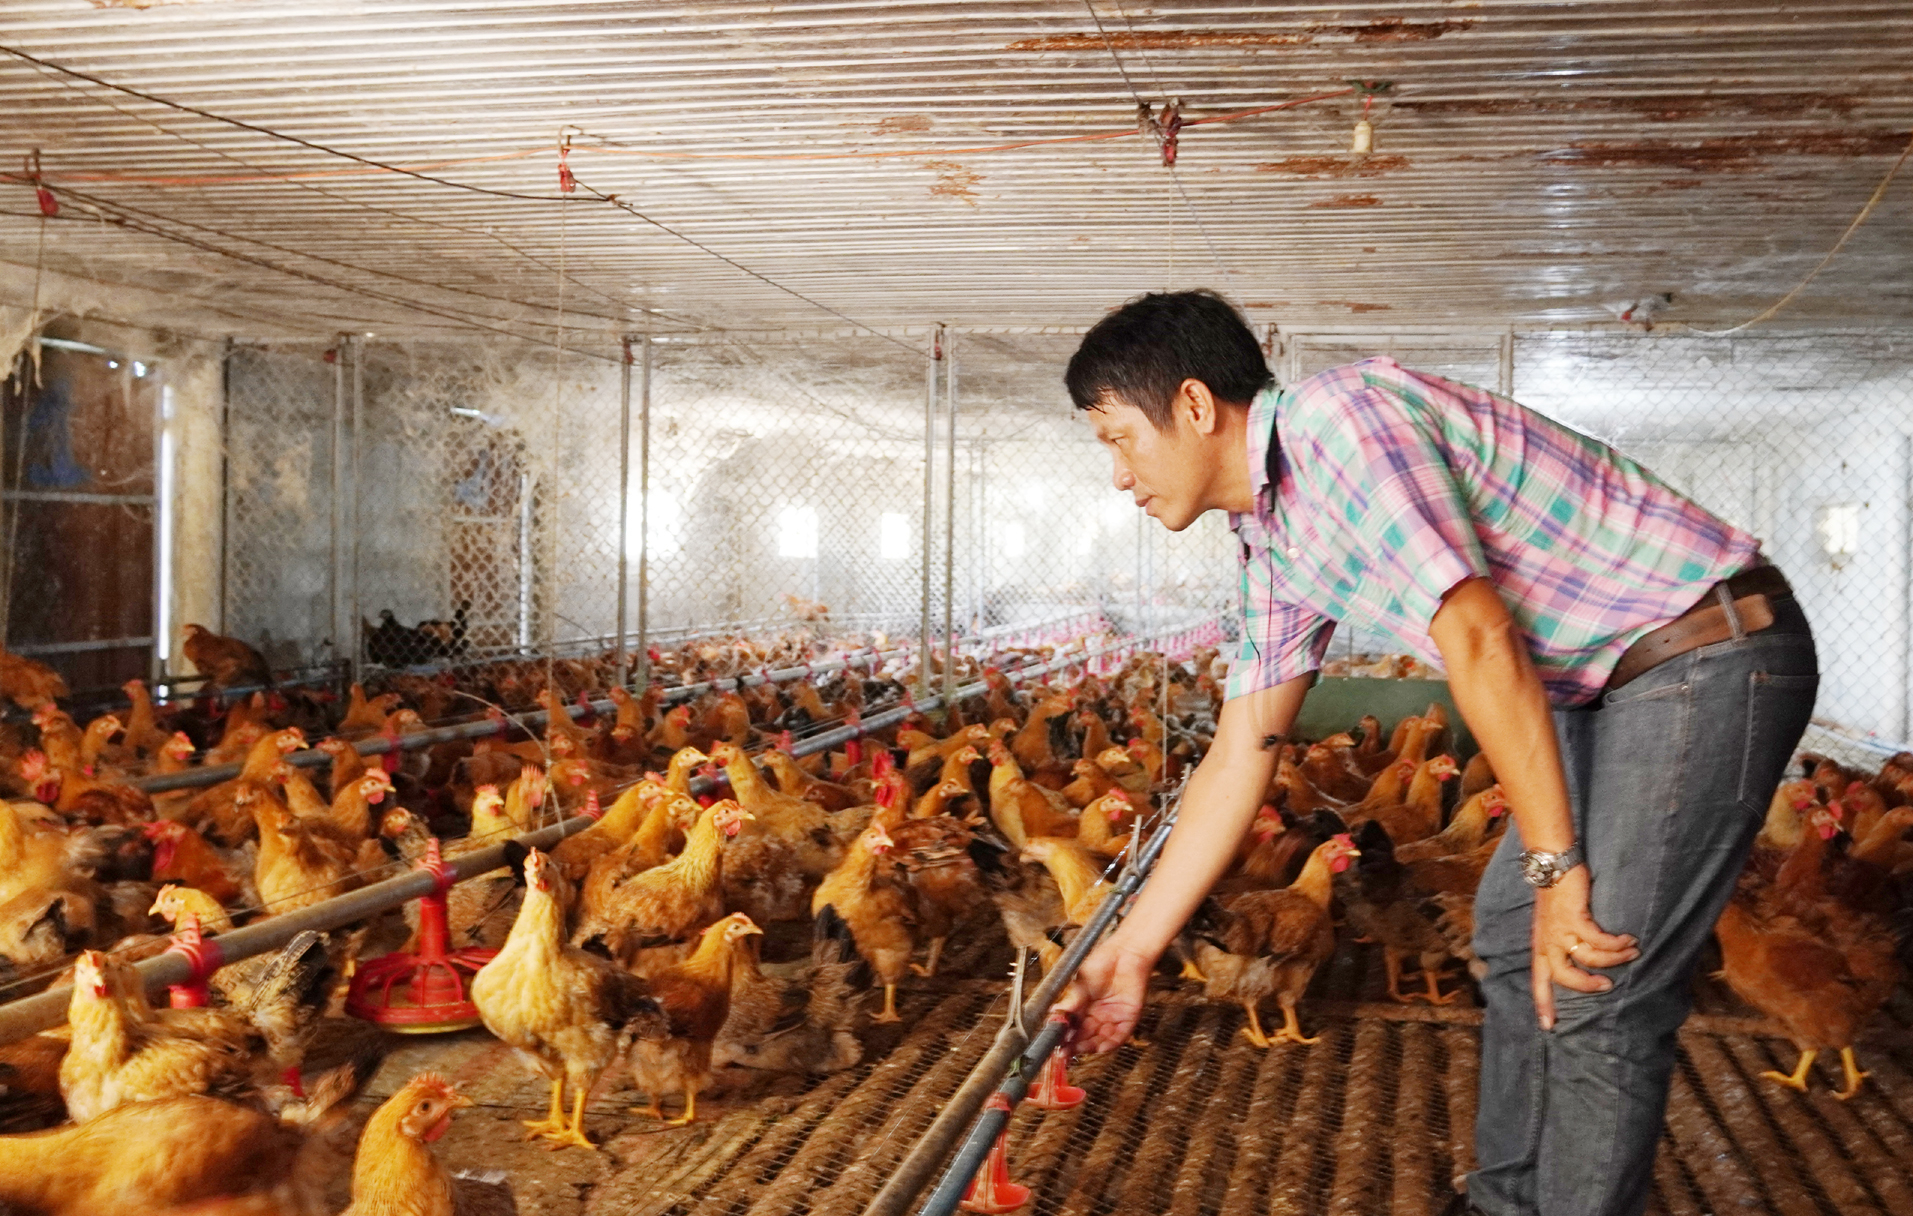 Applying high technology in chicken farming at Nhat Minh Company. Photo: T. Phung.